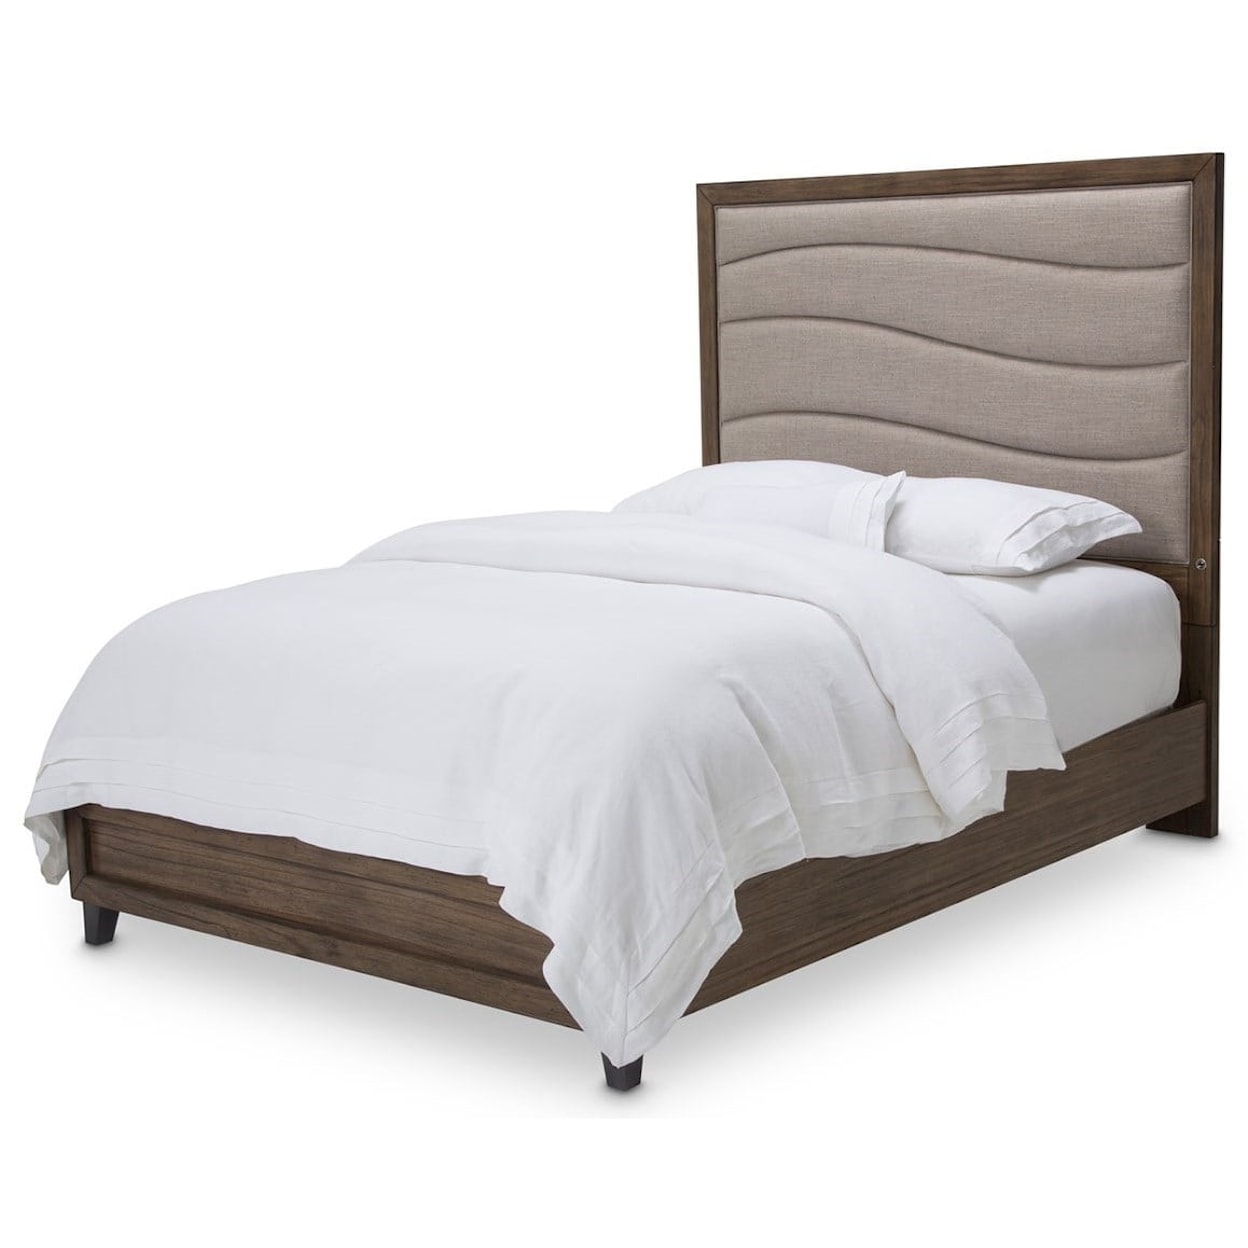 Michael Amini Del Mar Sound Queen Bed with Upholstered Headboard